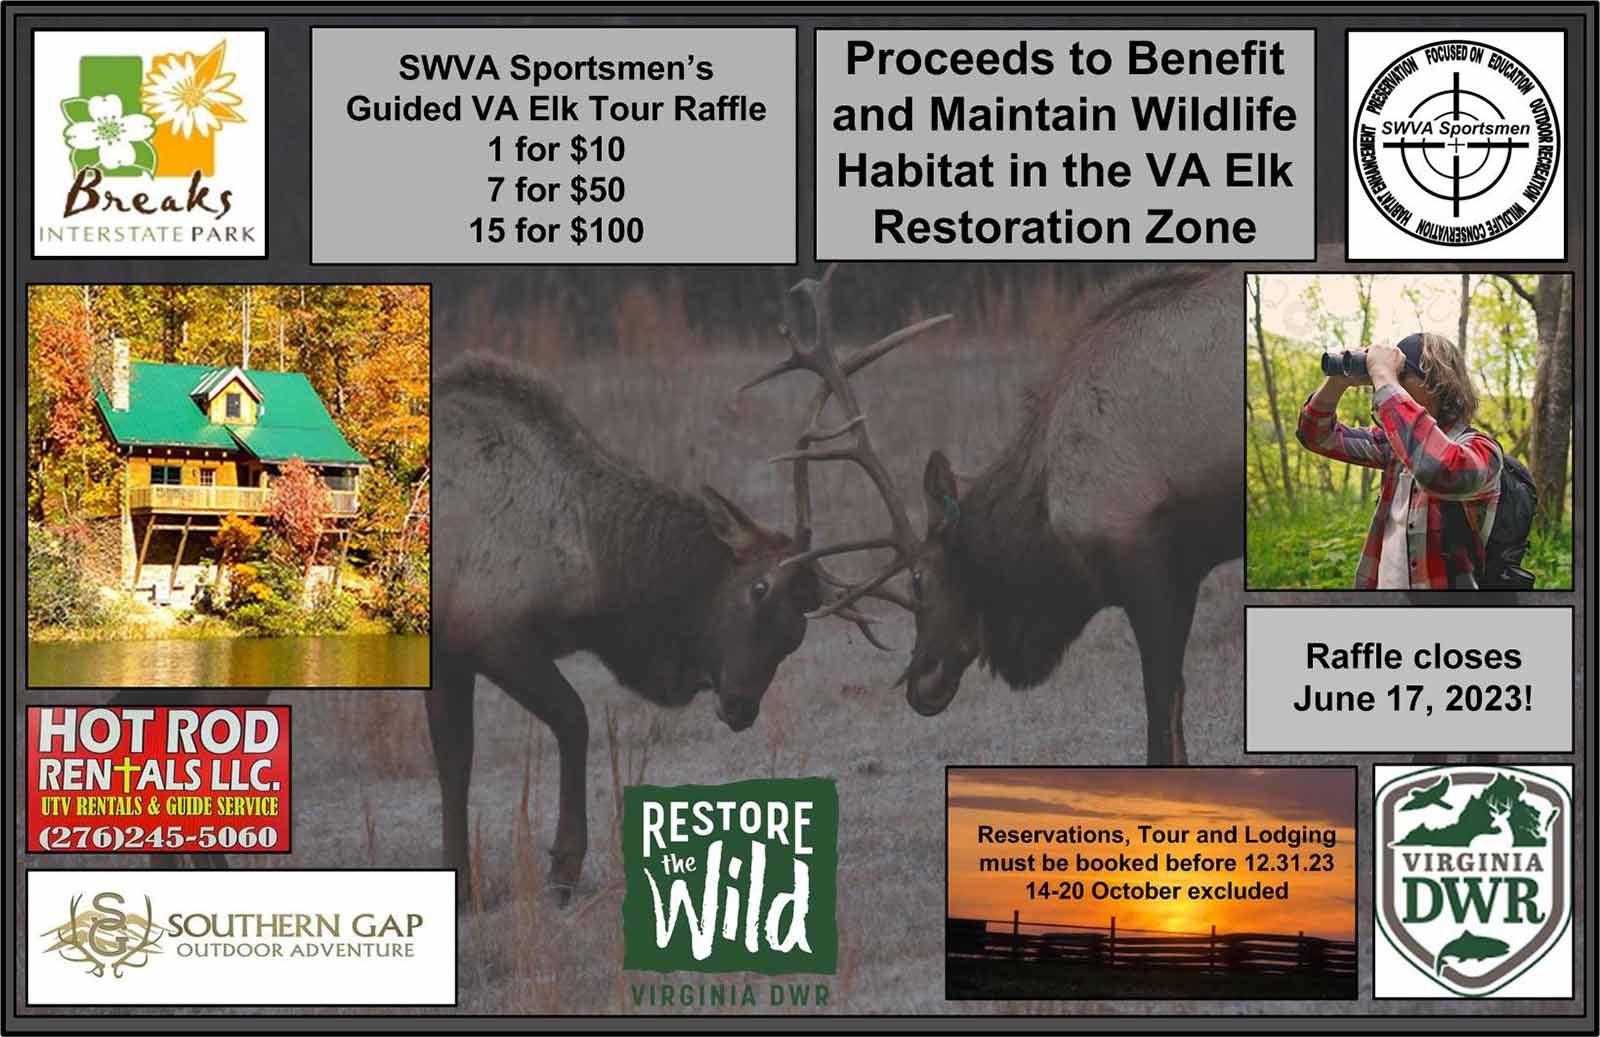 Click to open an image of the flyer for the Elk tour Raffle